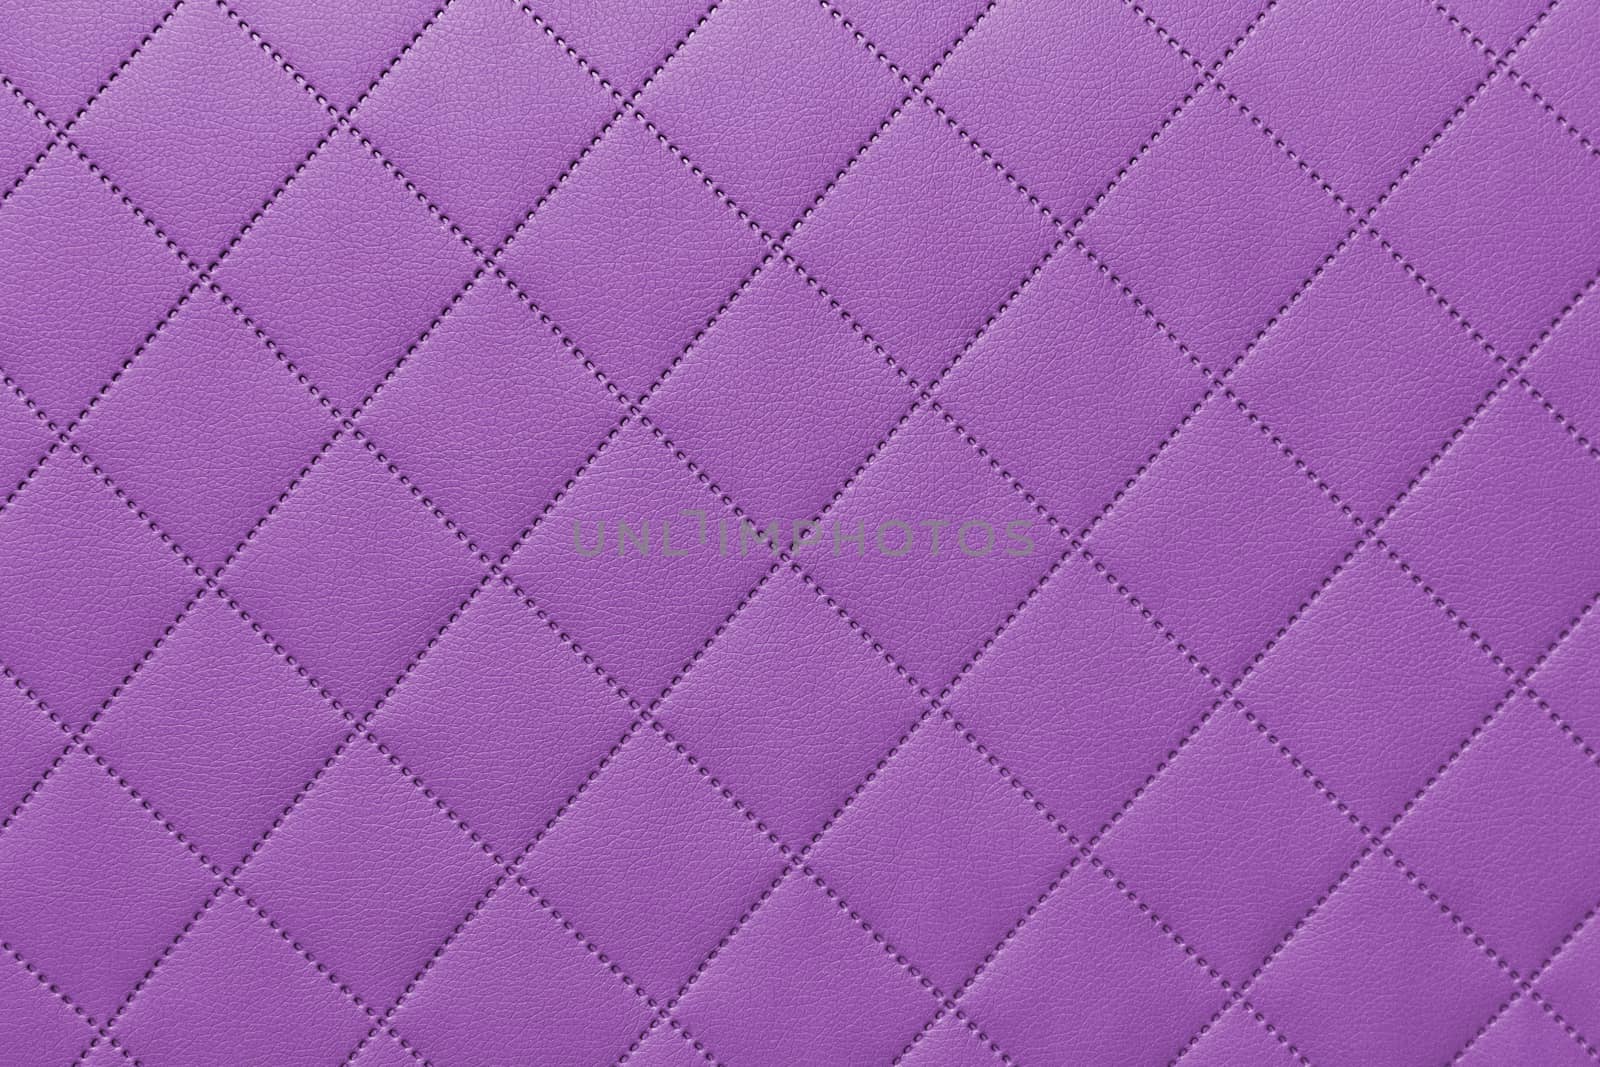 detail of sewn leather, purple leather upholstery background pattern